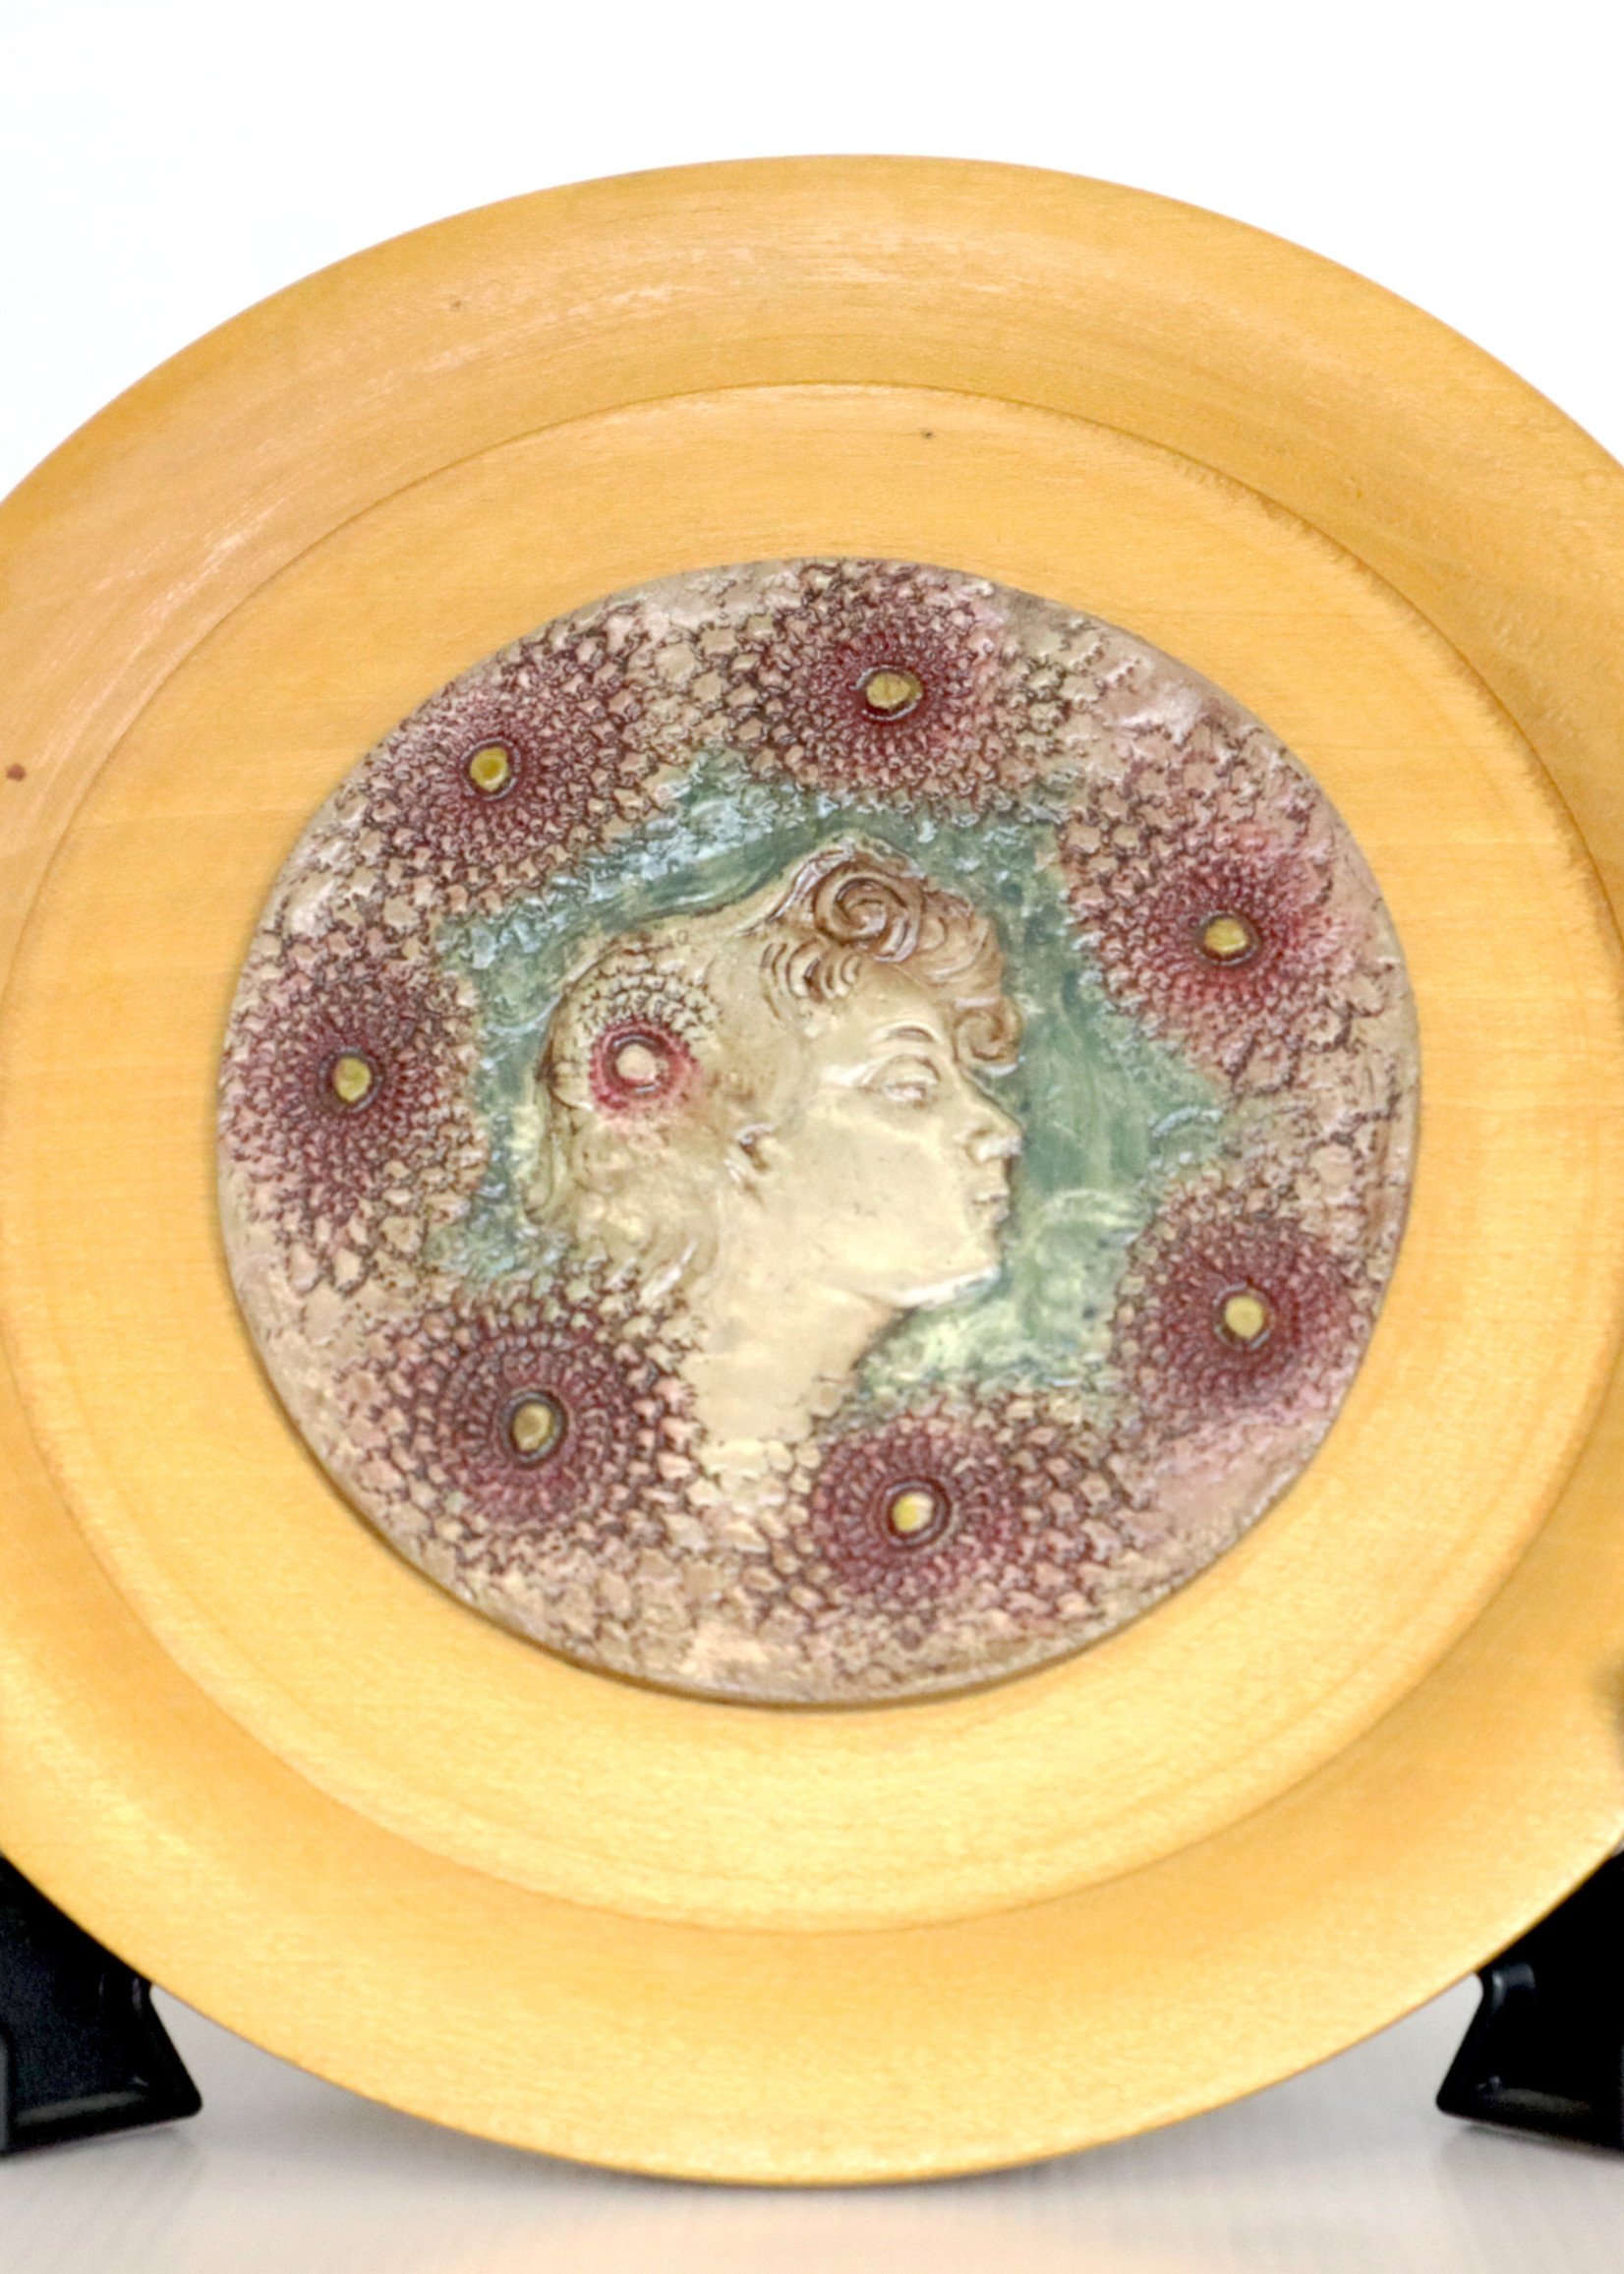 BW Wooden plate w/ ceramic image